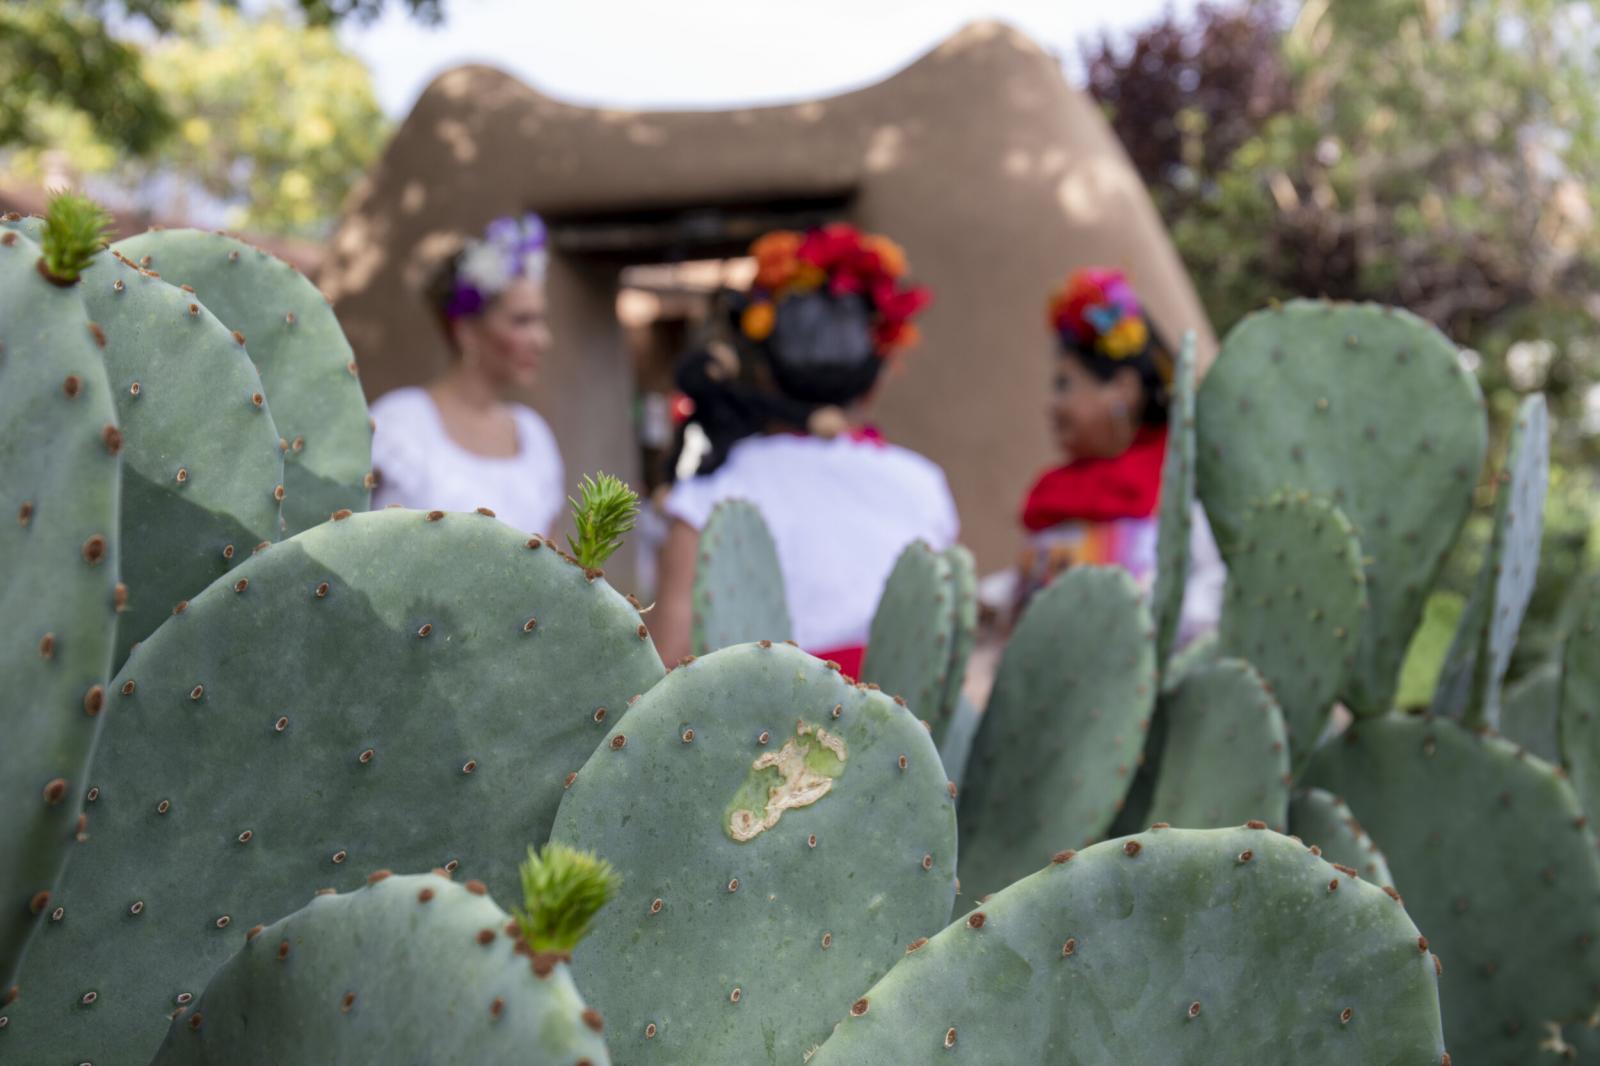 Women dressed up as Frida Kahlo...f some cacti during the Fiesta.